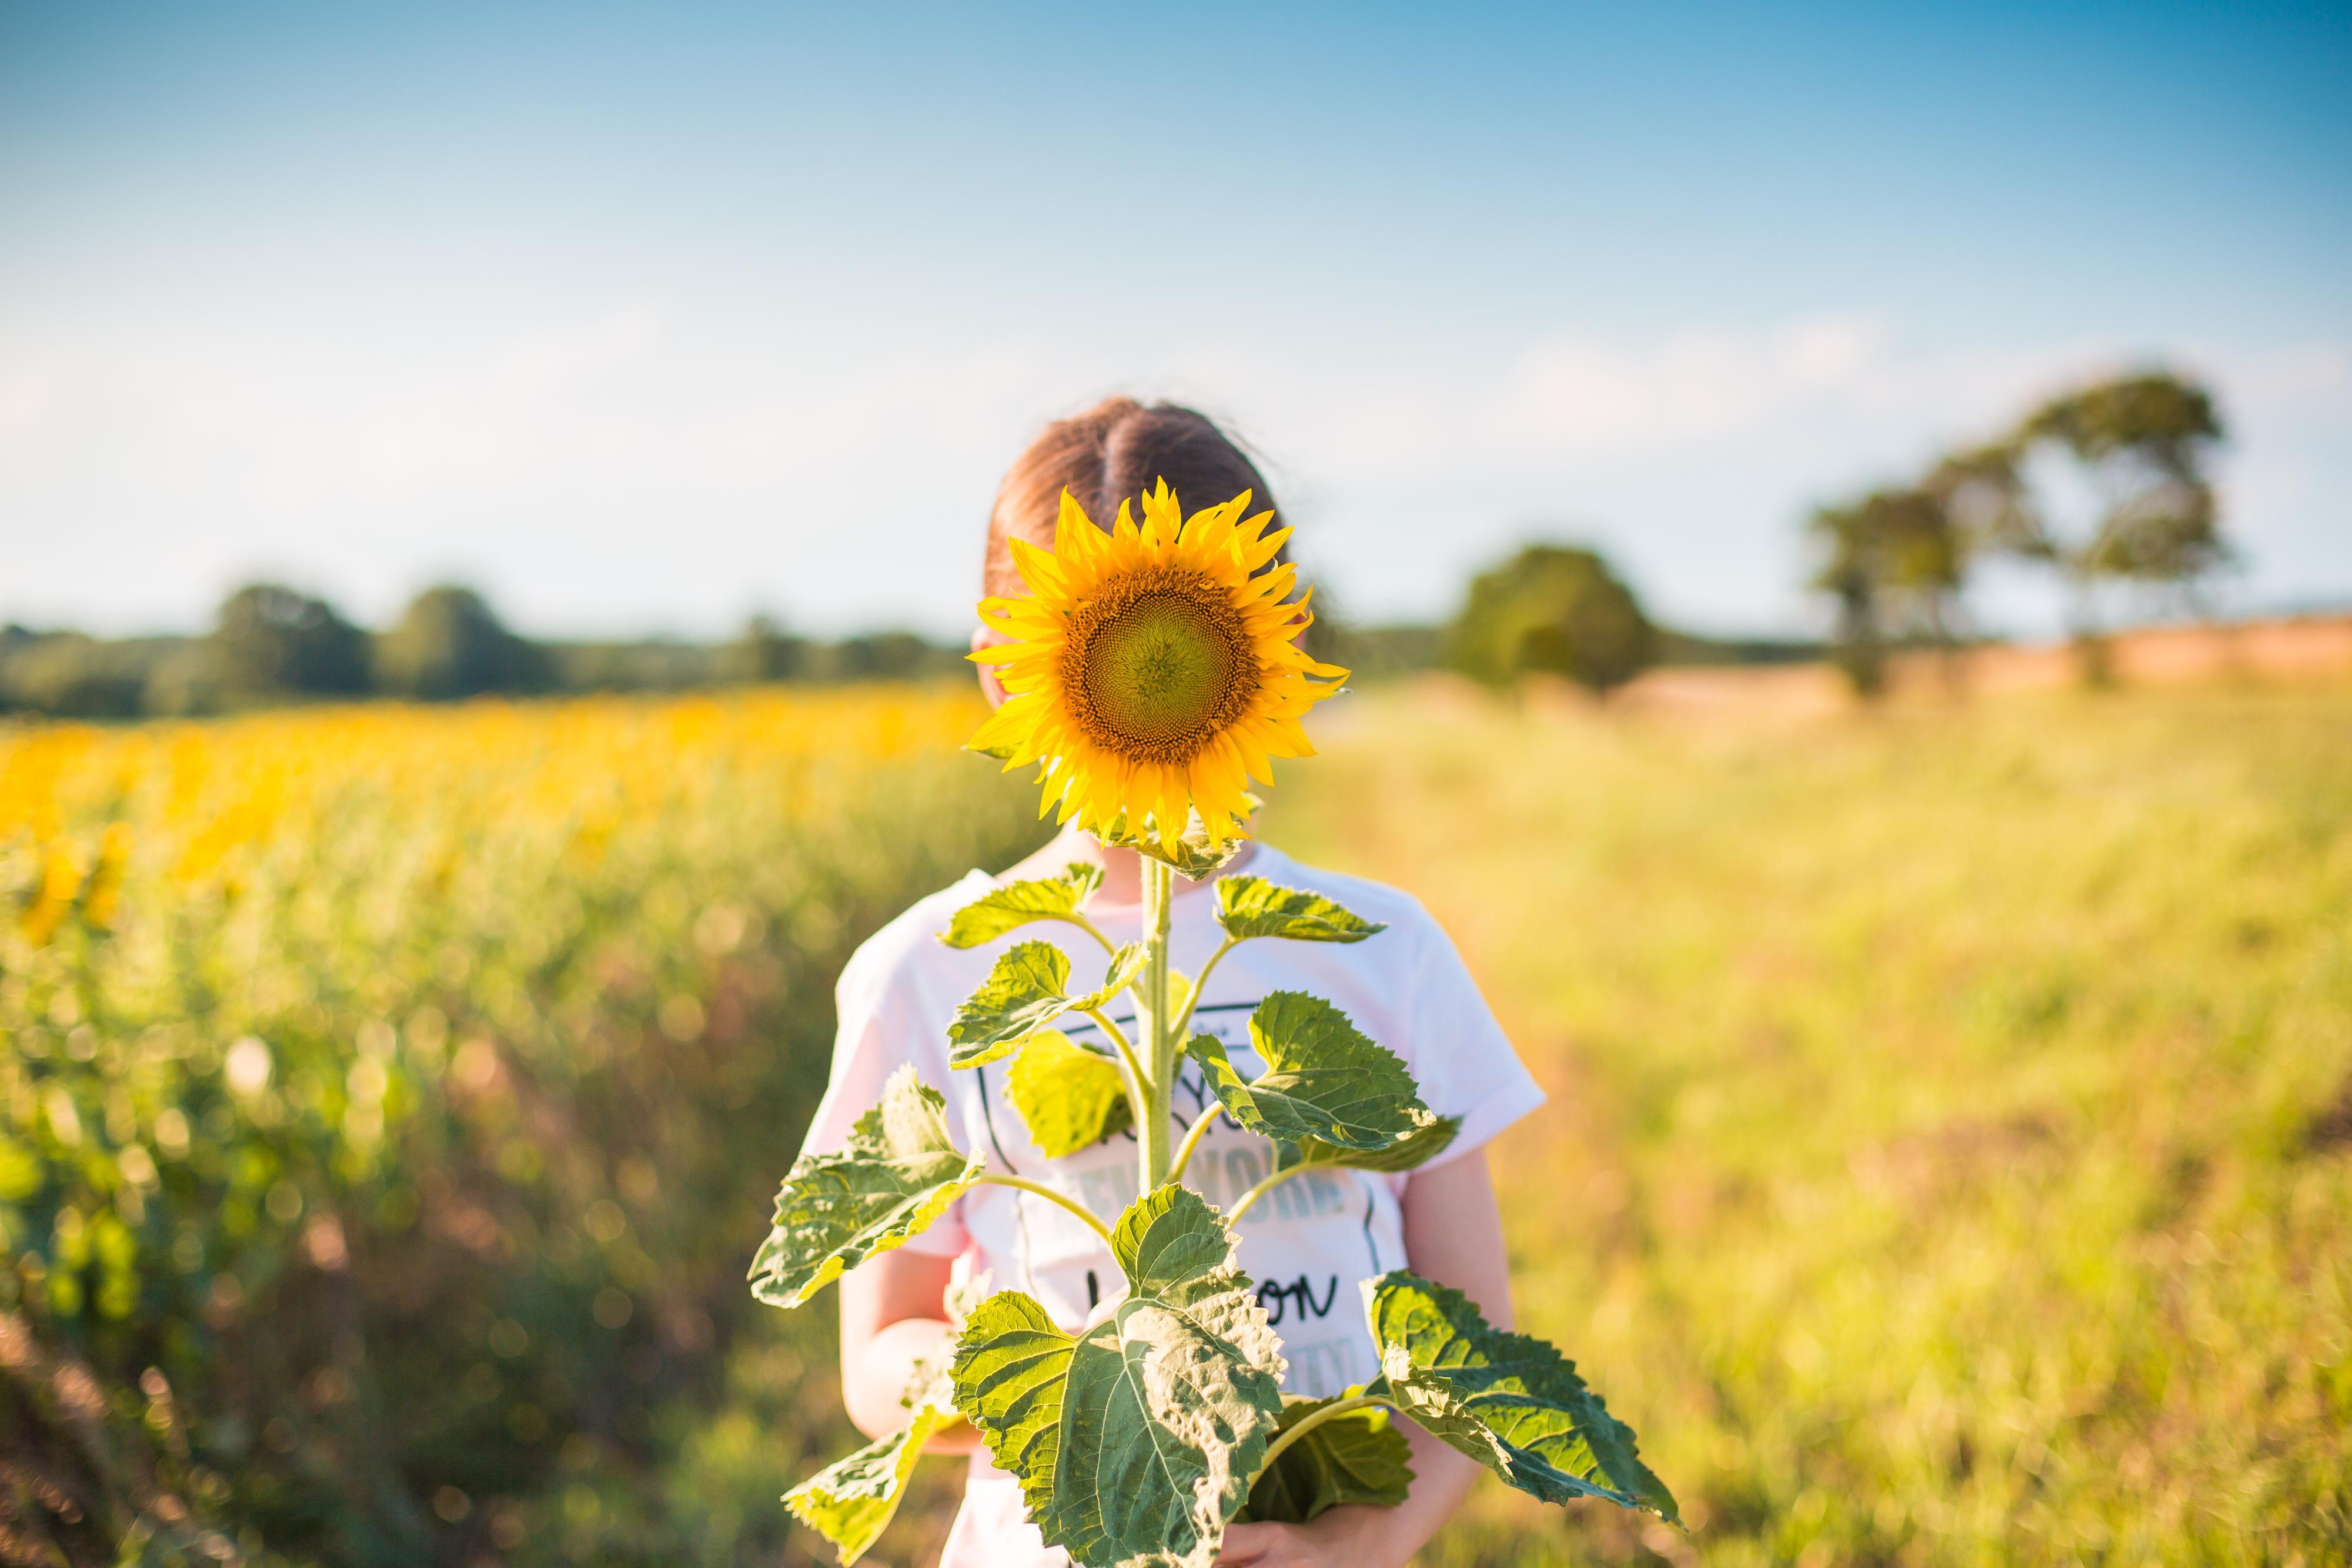 Little Girl with Sunflower in a Sunflower Field Free